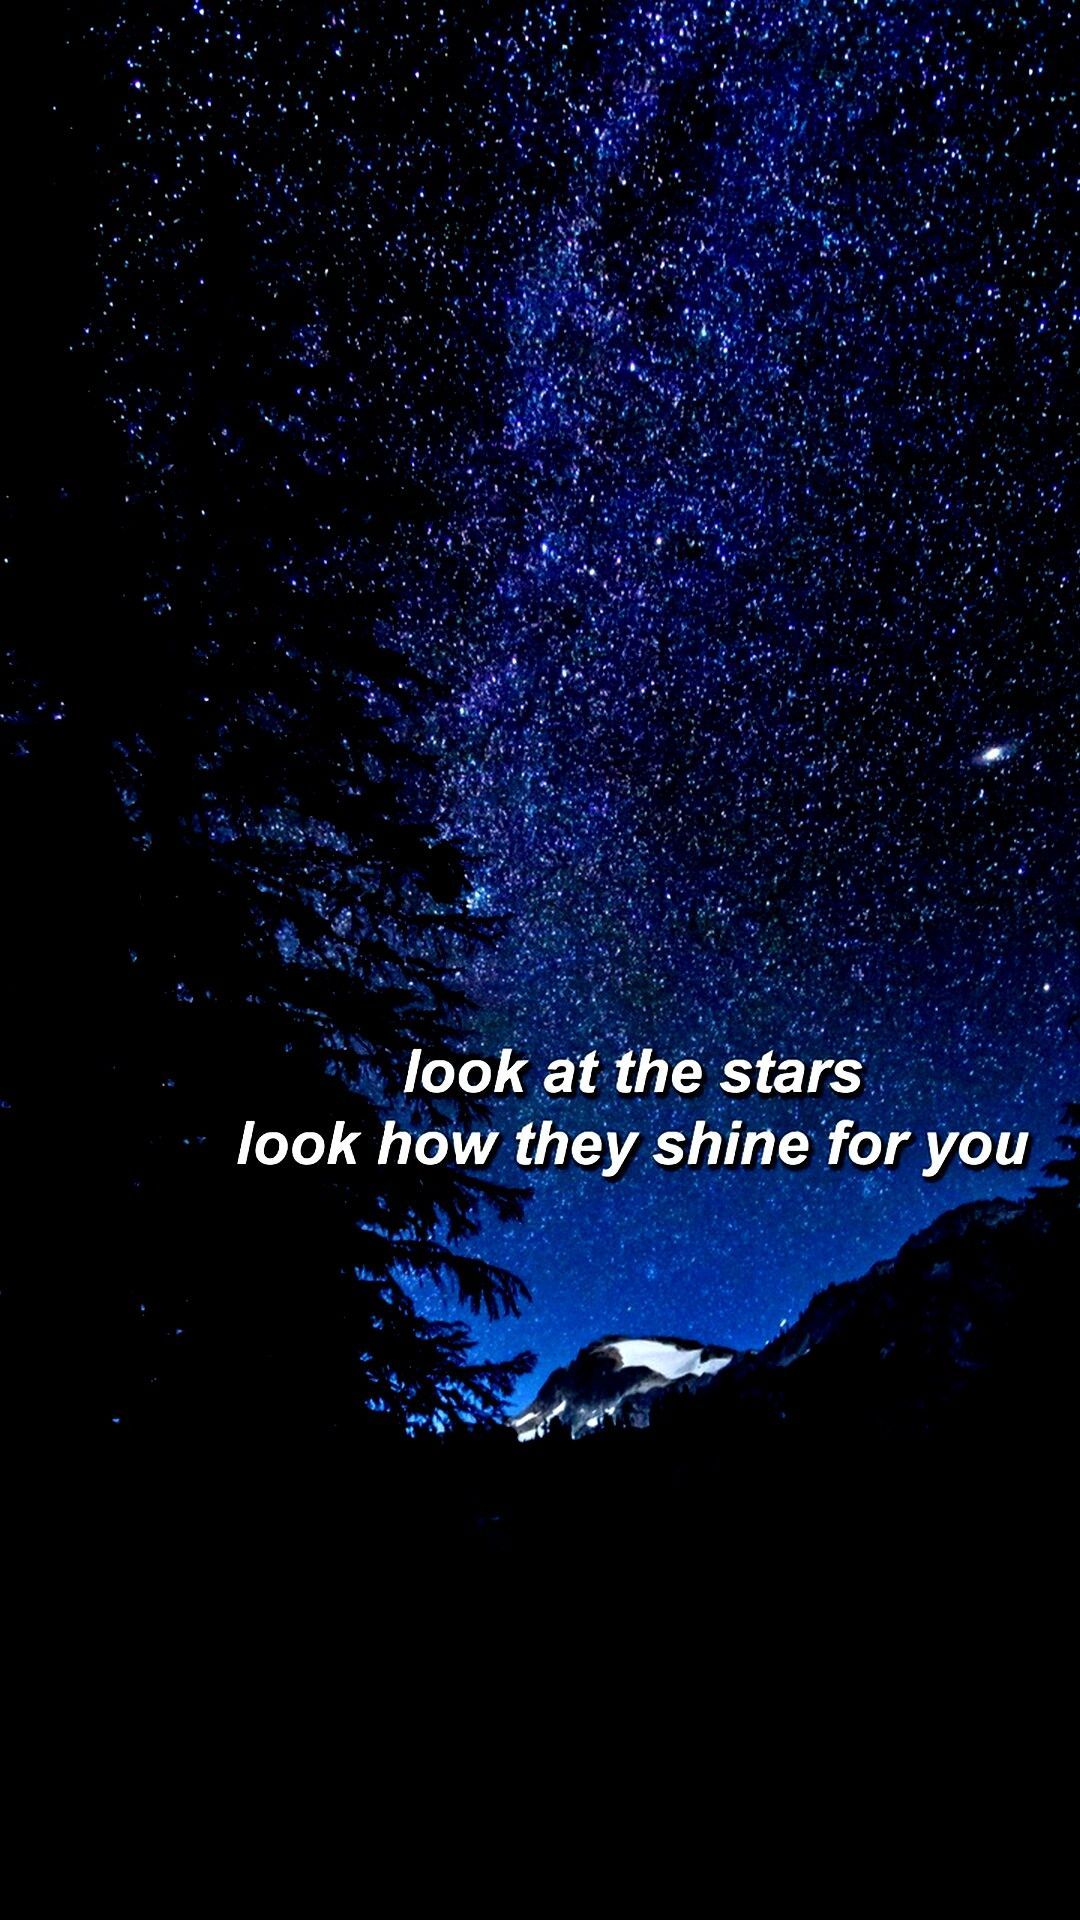 Look at the stars, look how they shine for you. - Stars